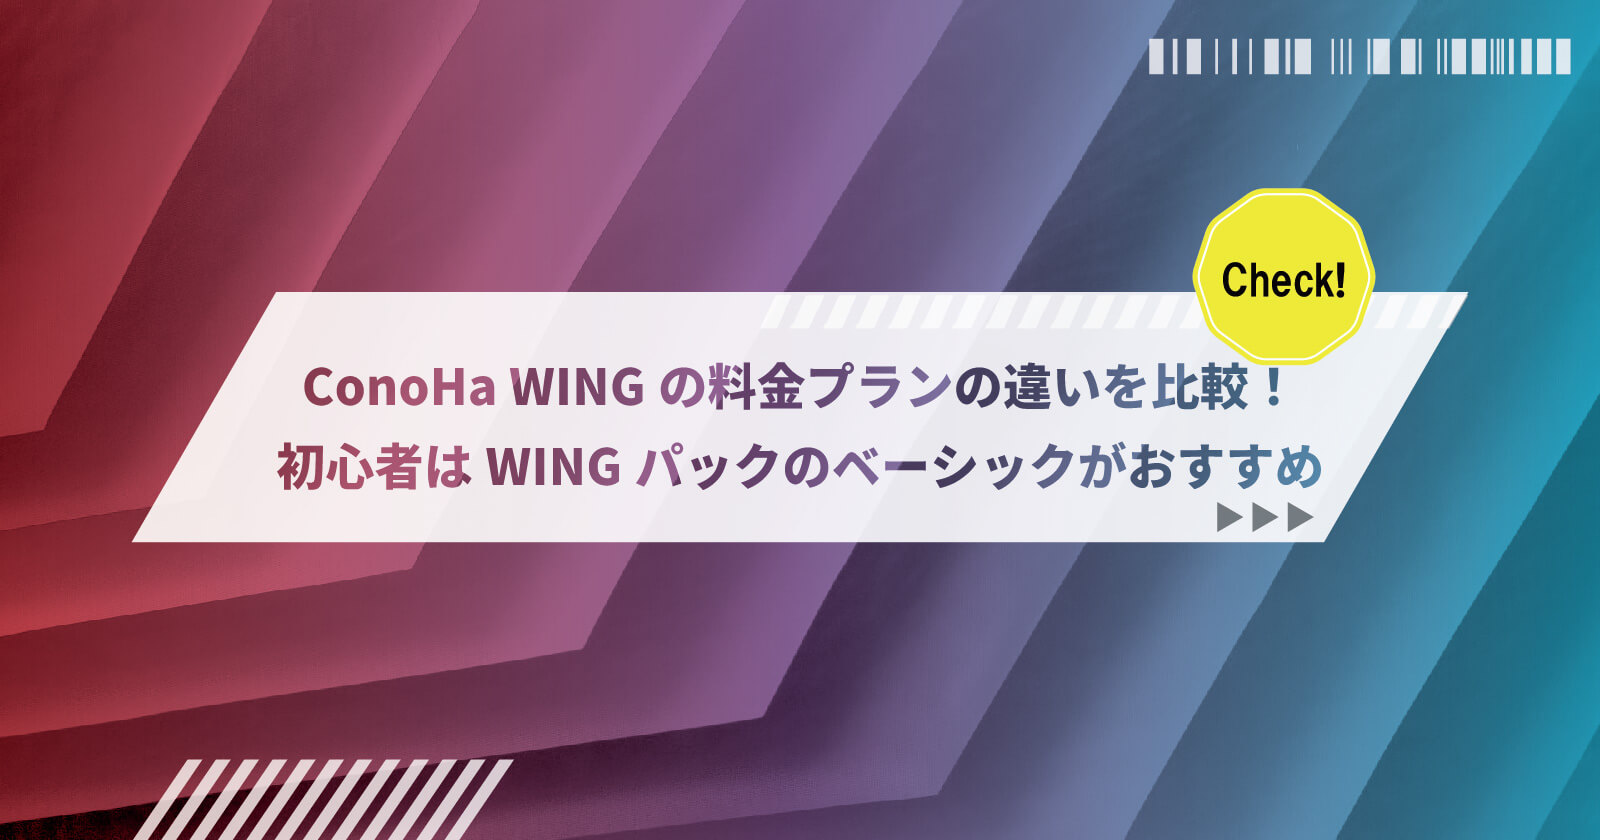 ConoHa WINGの料金プラン